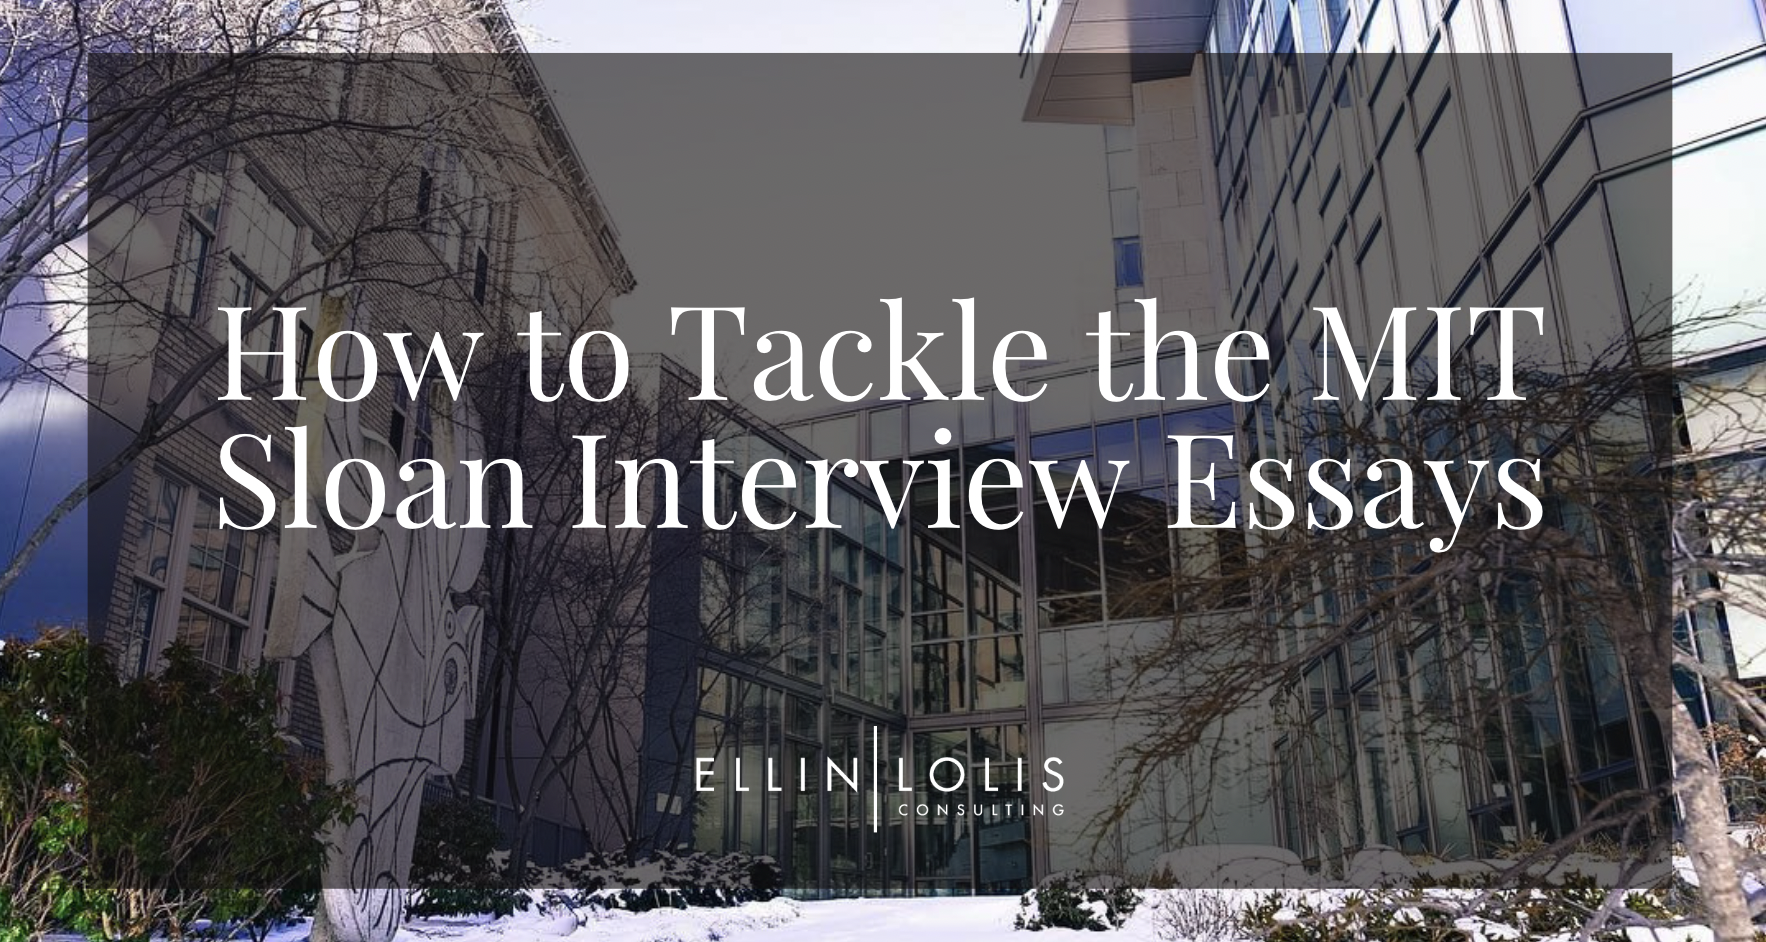 How to Tackle the MIT Interview Essays